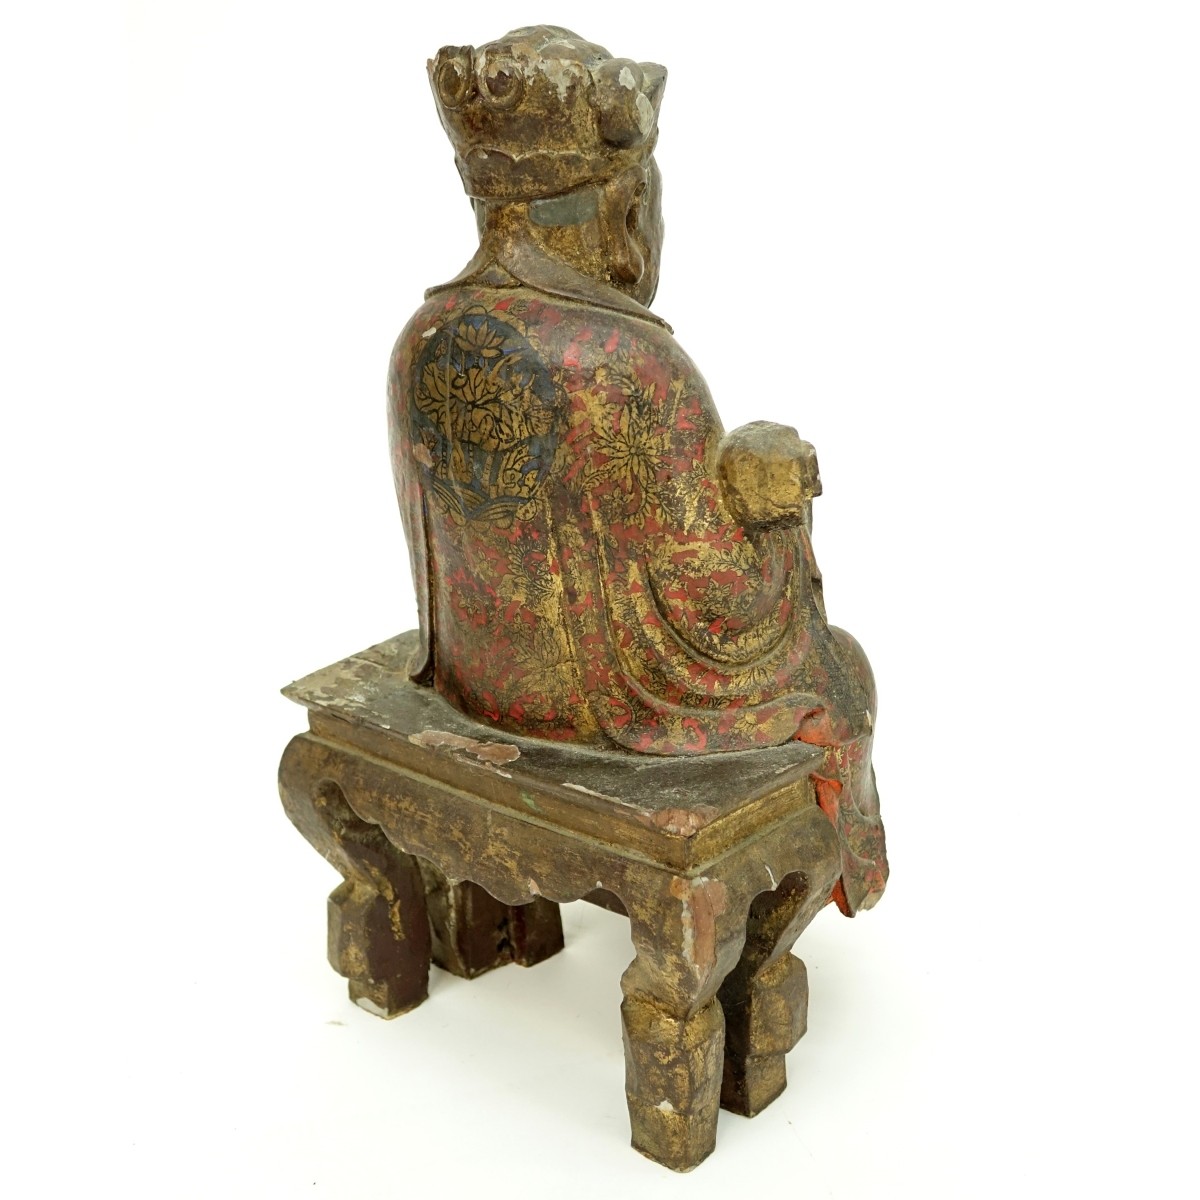 Chinese Polychrome Carved Wood Seated Immortal